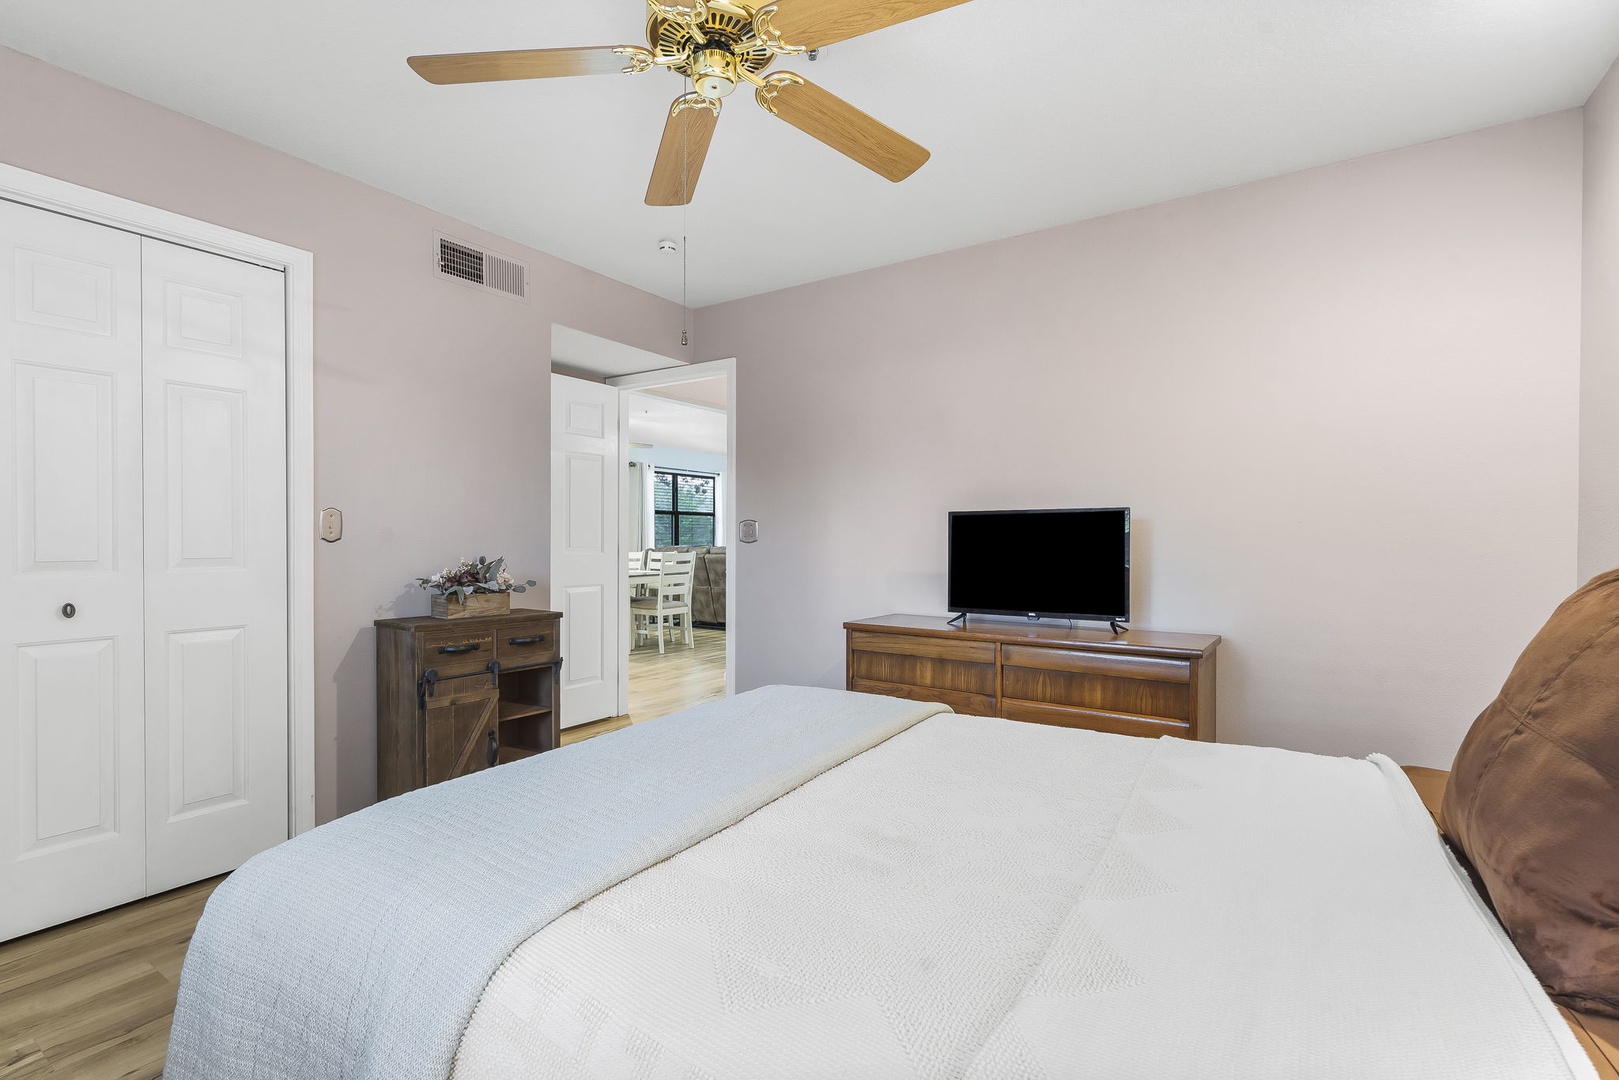 The spacious queen bedroom offers a Smart TV & ceiling fan